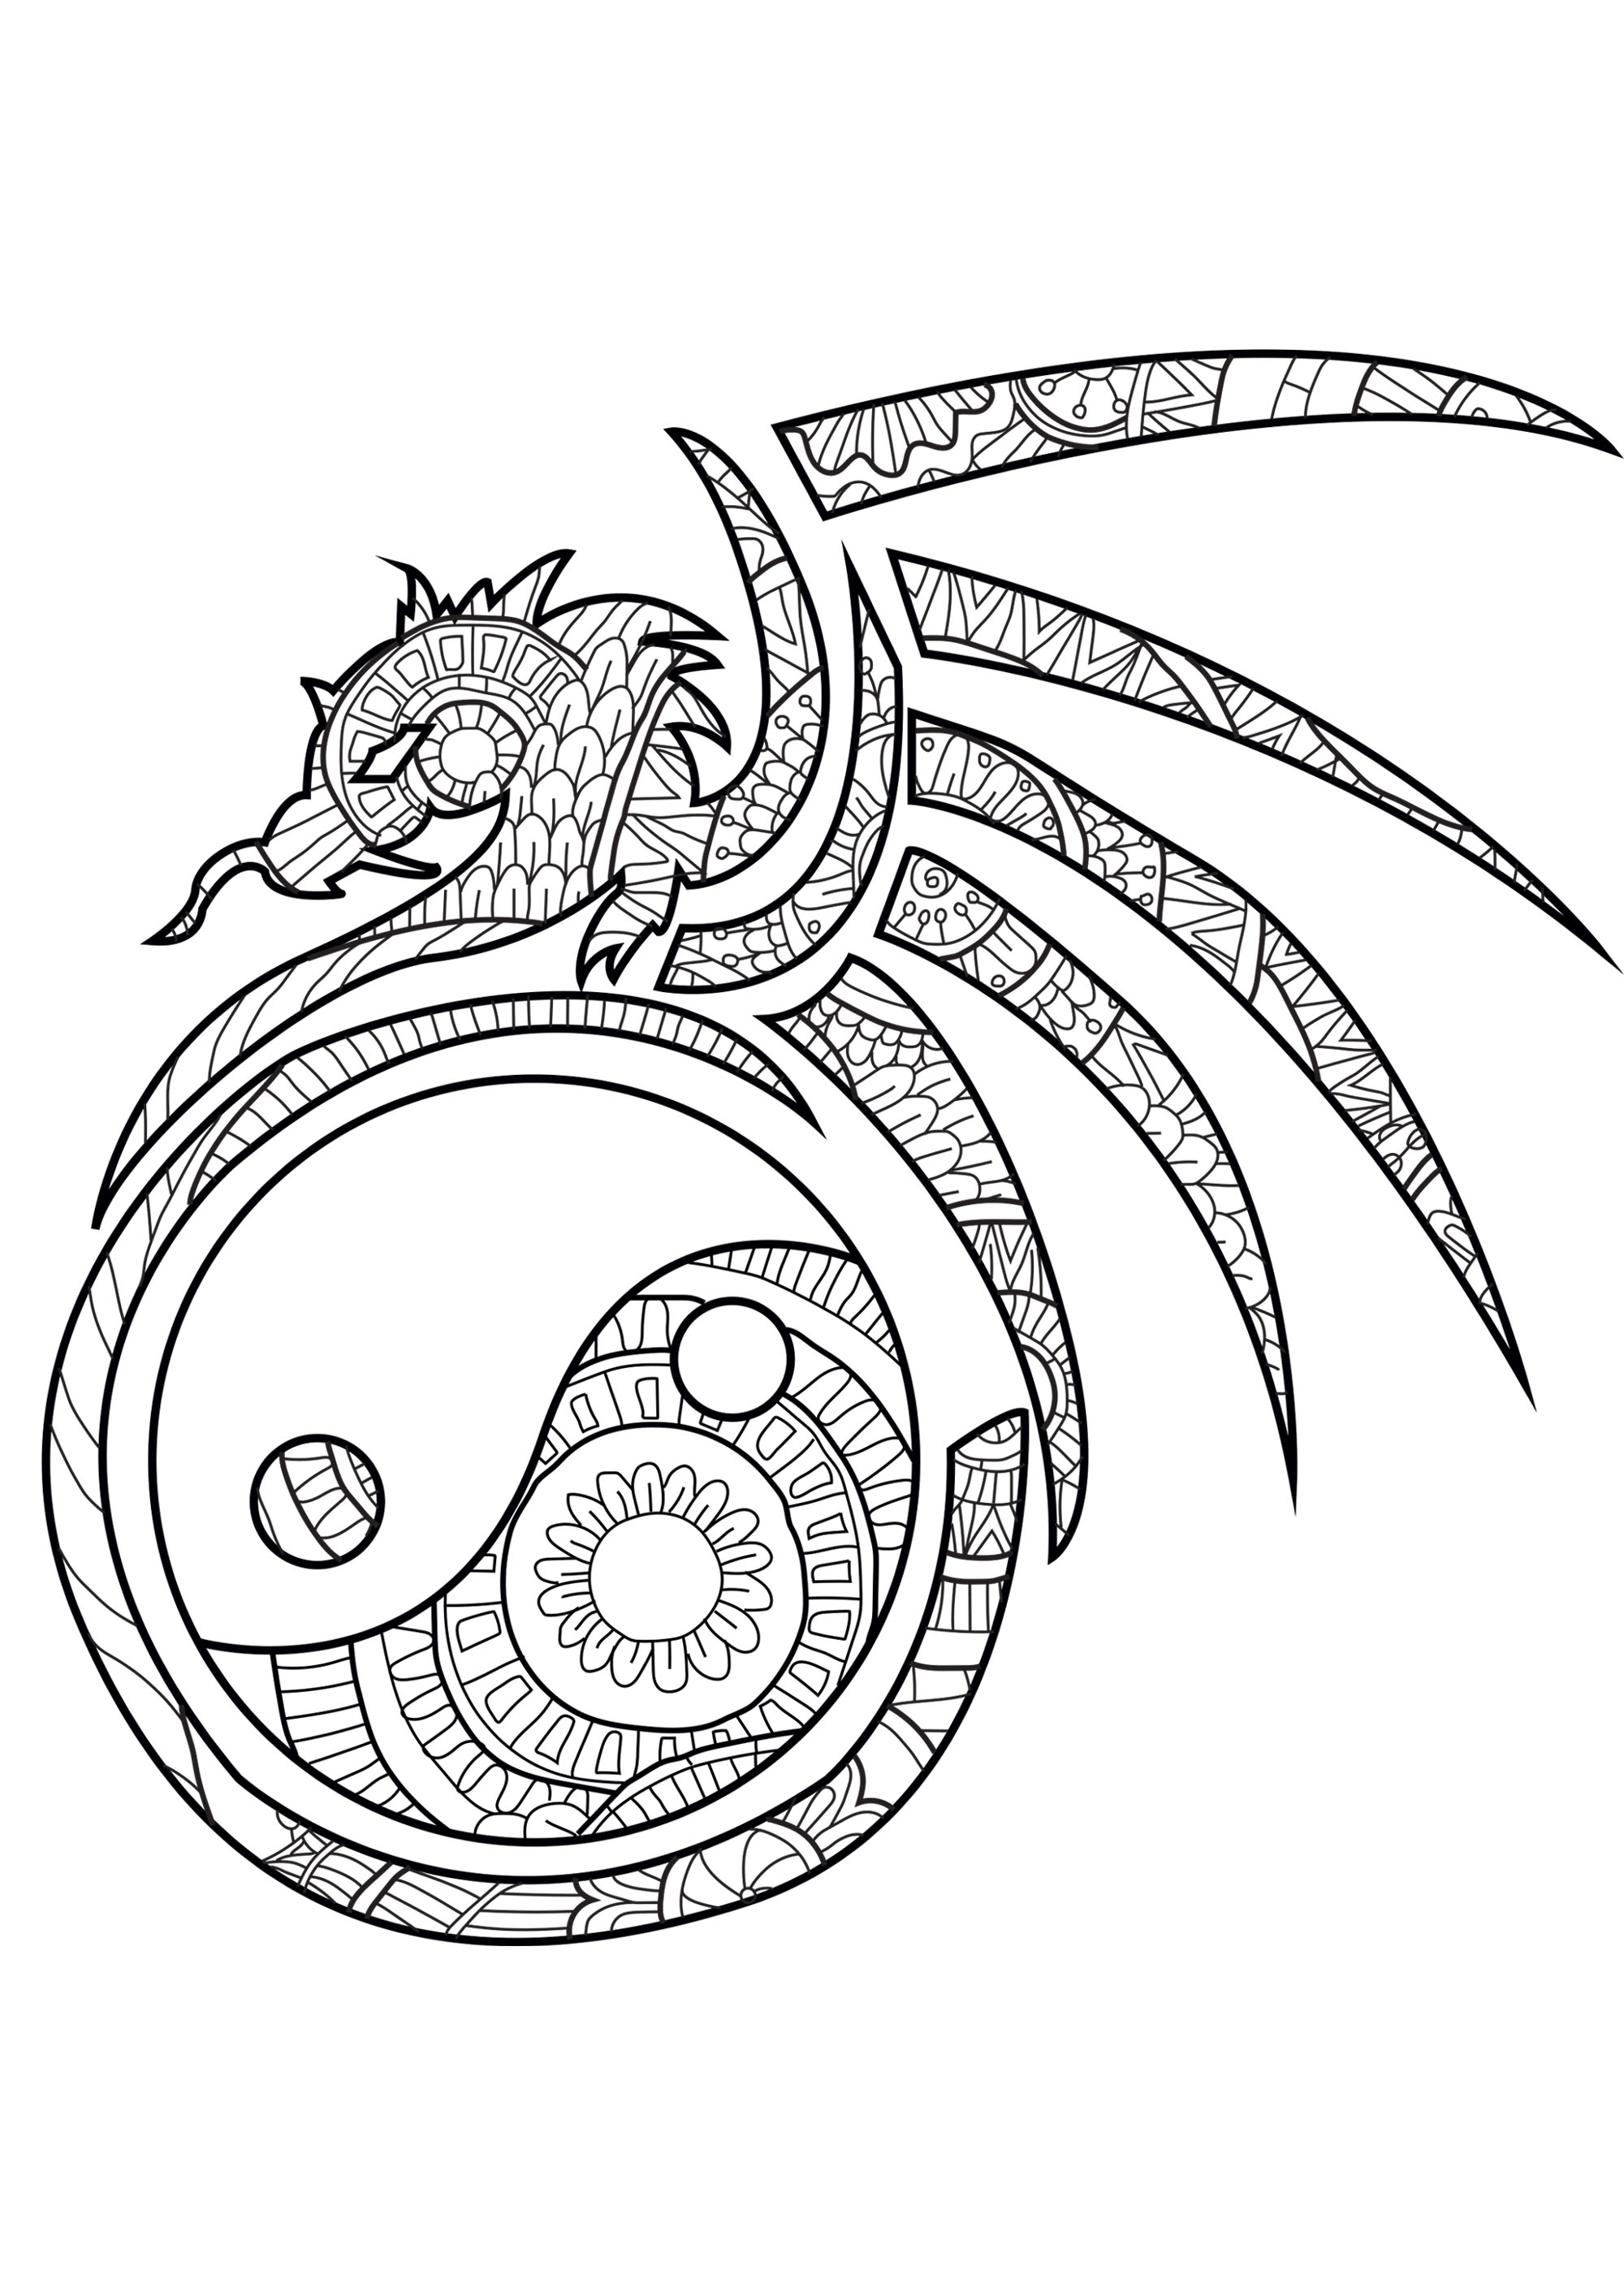 Yin and yang - Coloring Pages for Adults